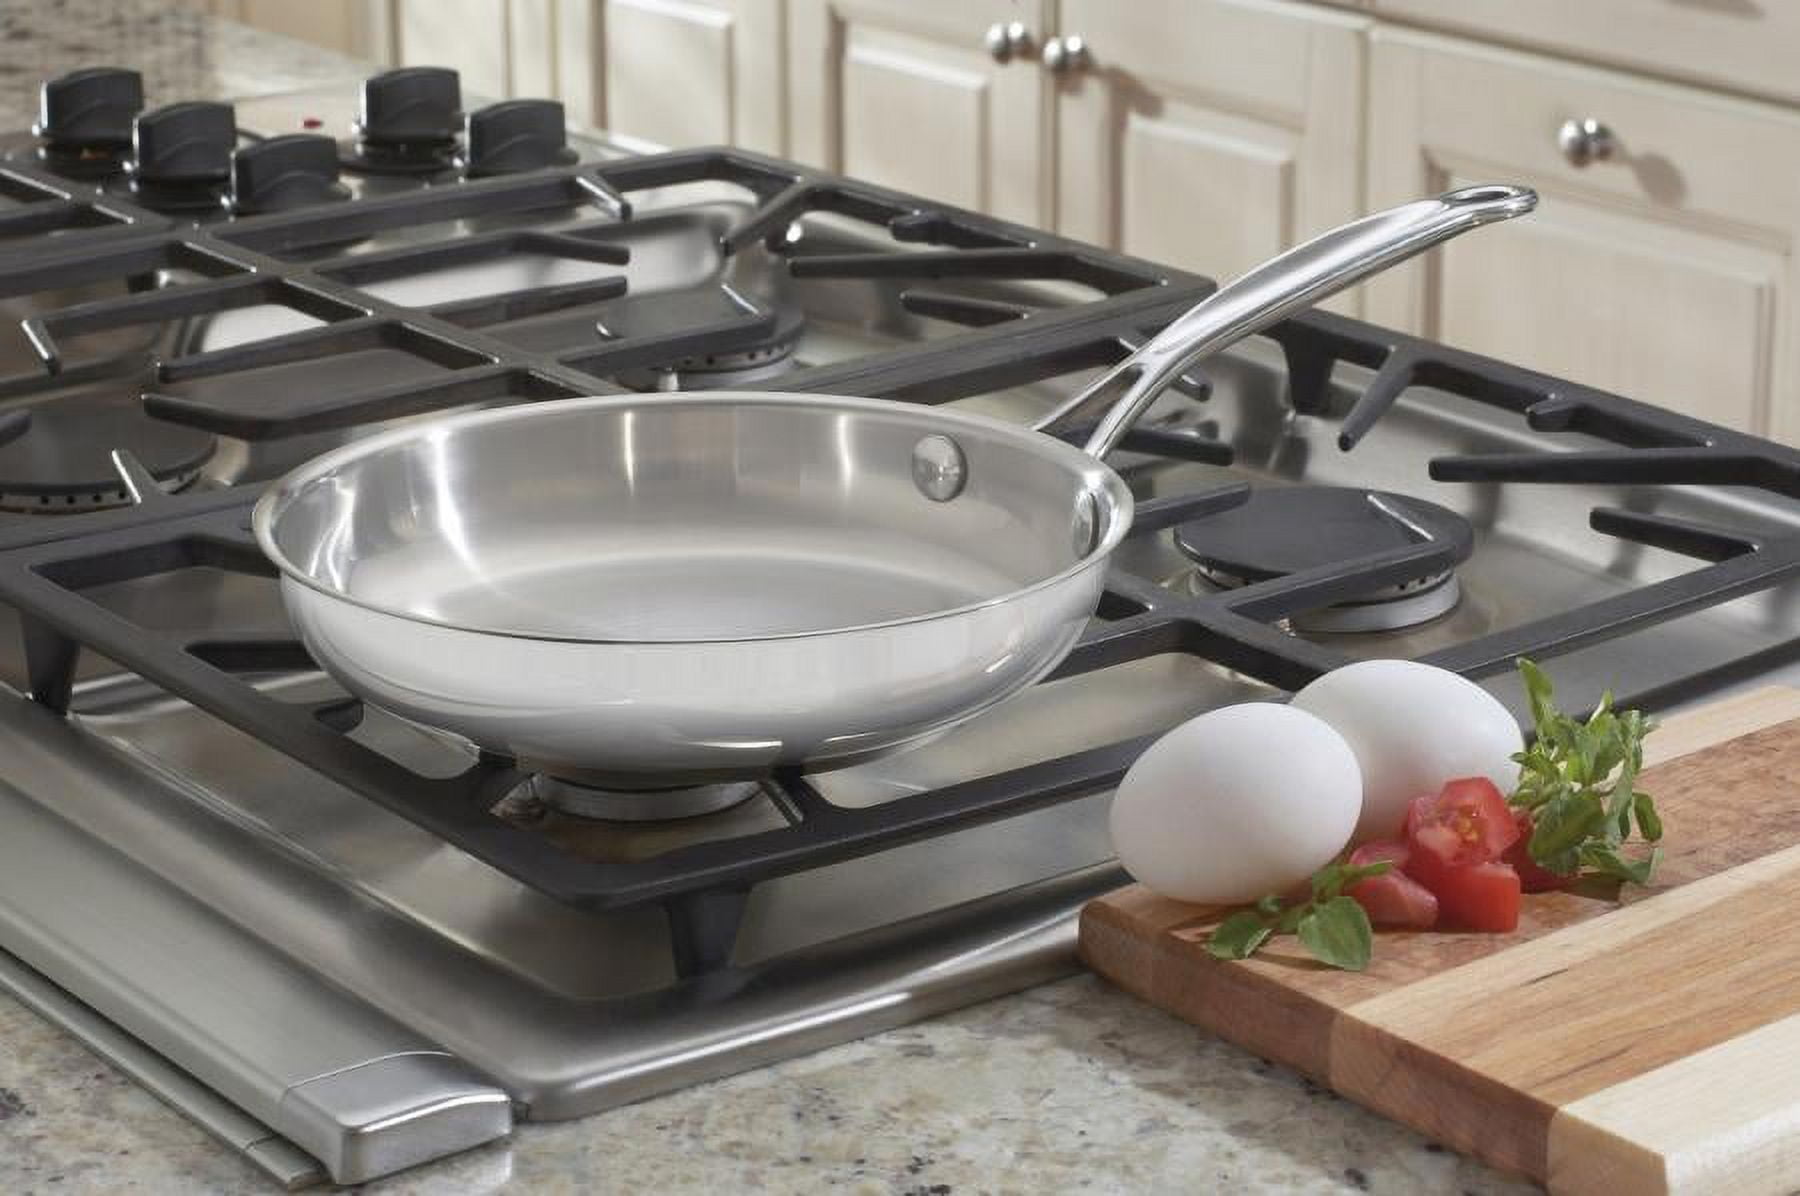 CLASSIC INDUCTION 8'' Fry Pan